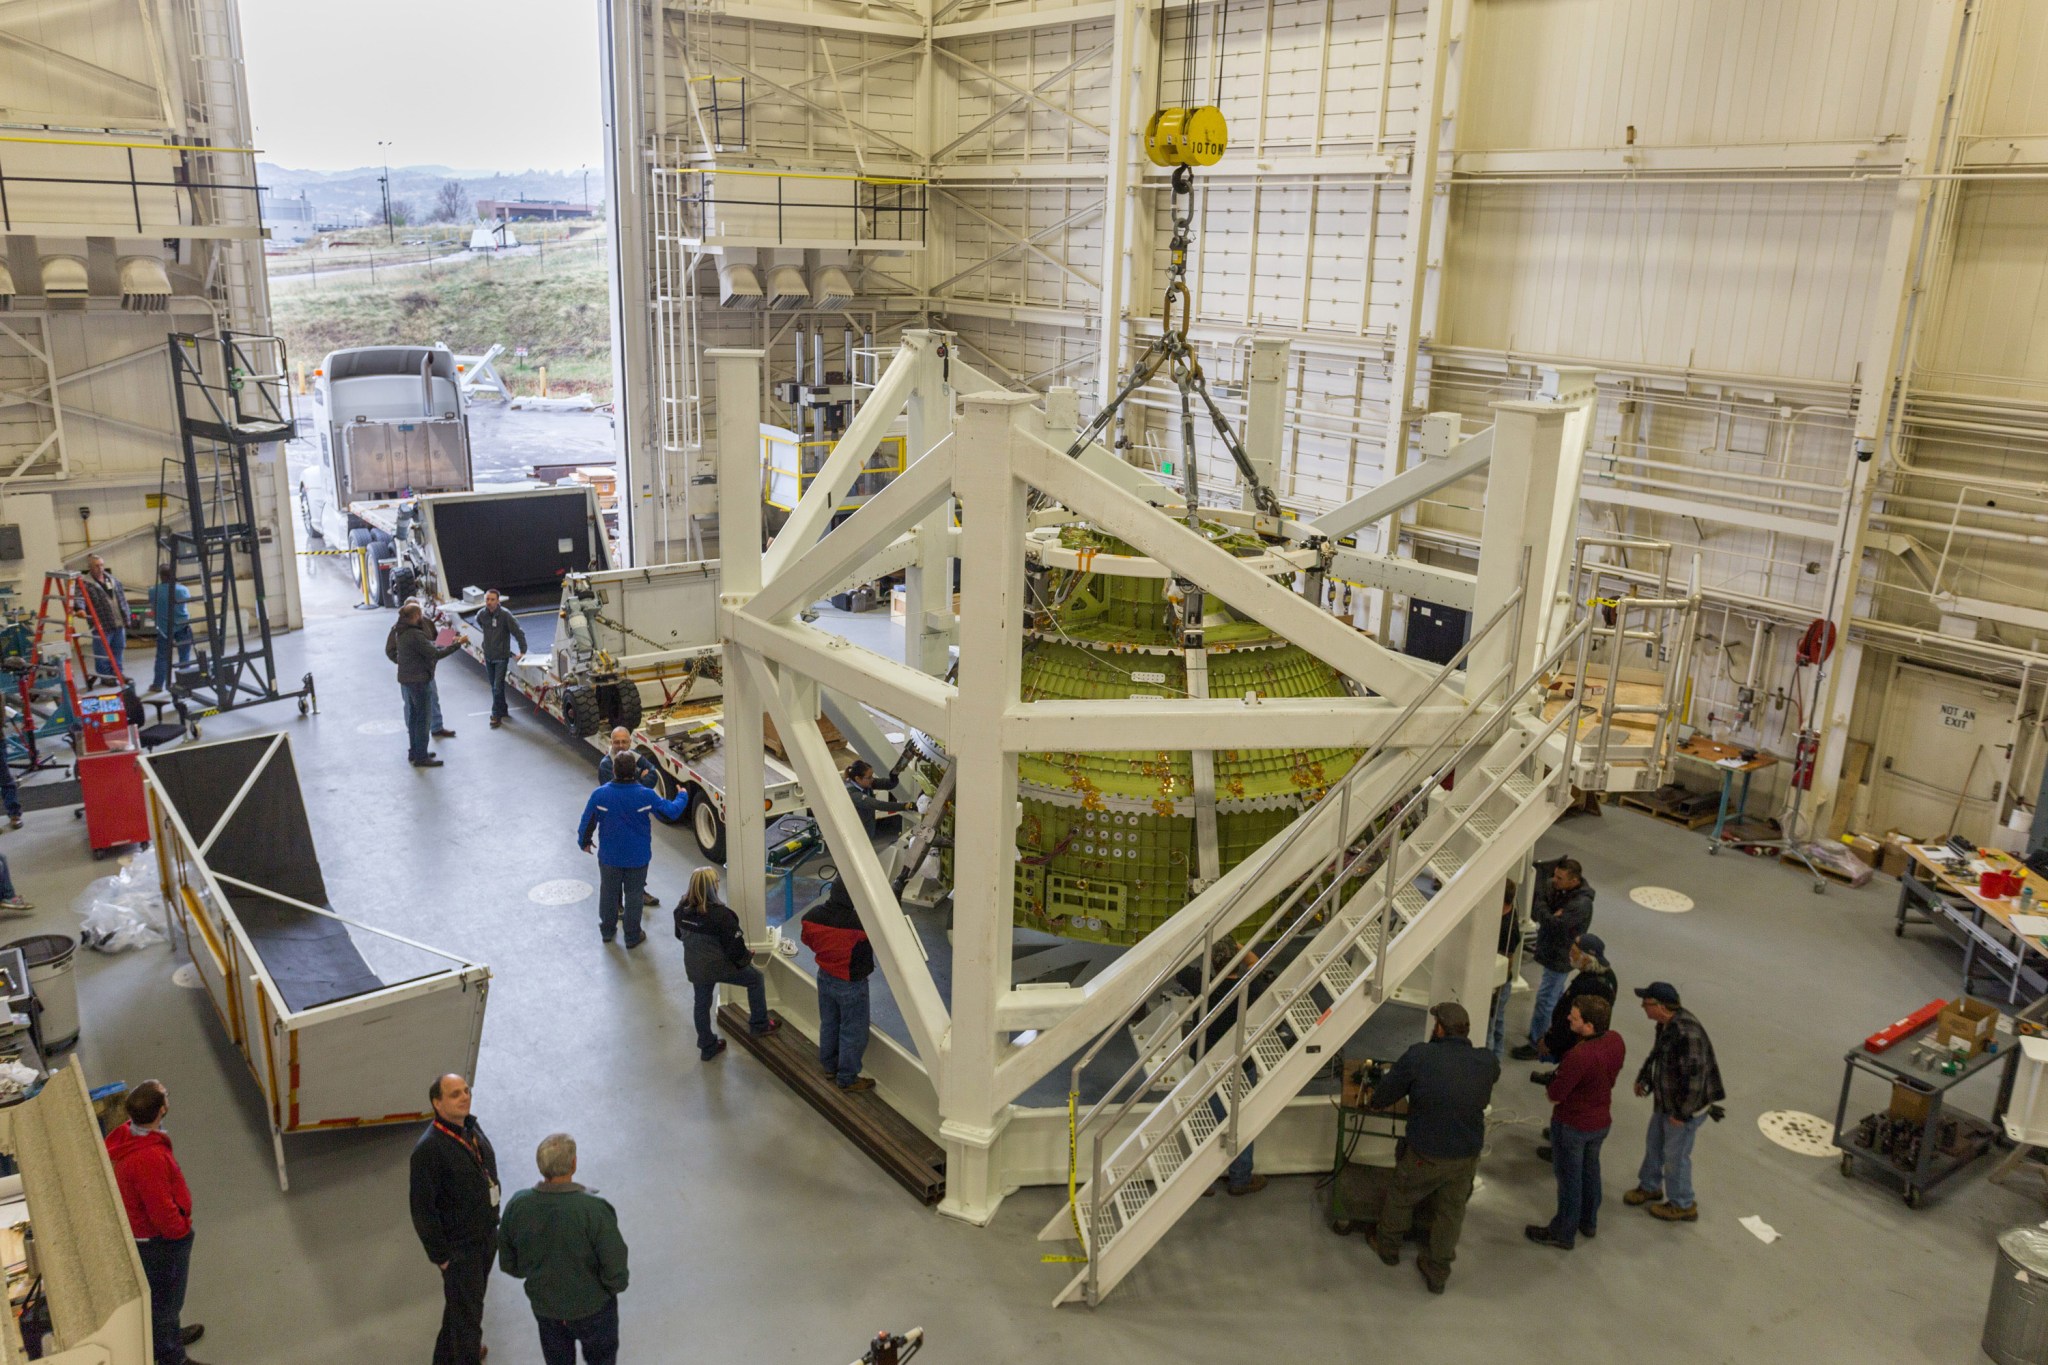 The Orion Exploration Mission-1 crew module structural test article was delivered to Lockheed Martin near Denver on April 27.